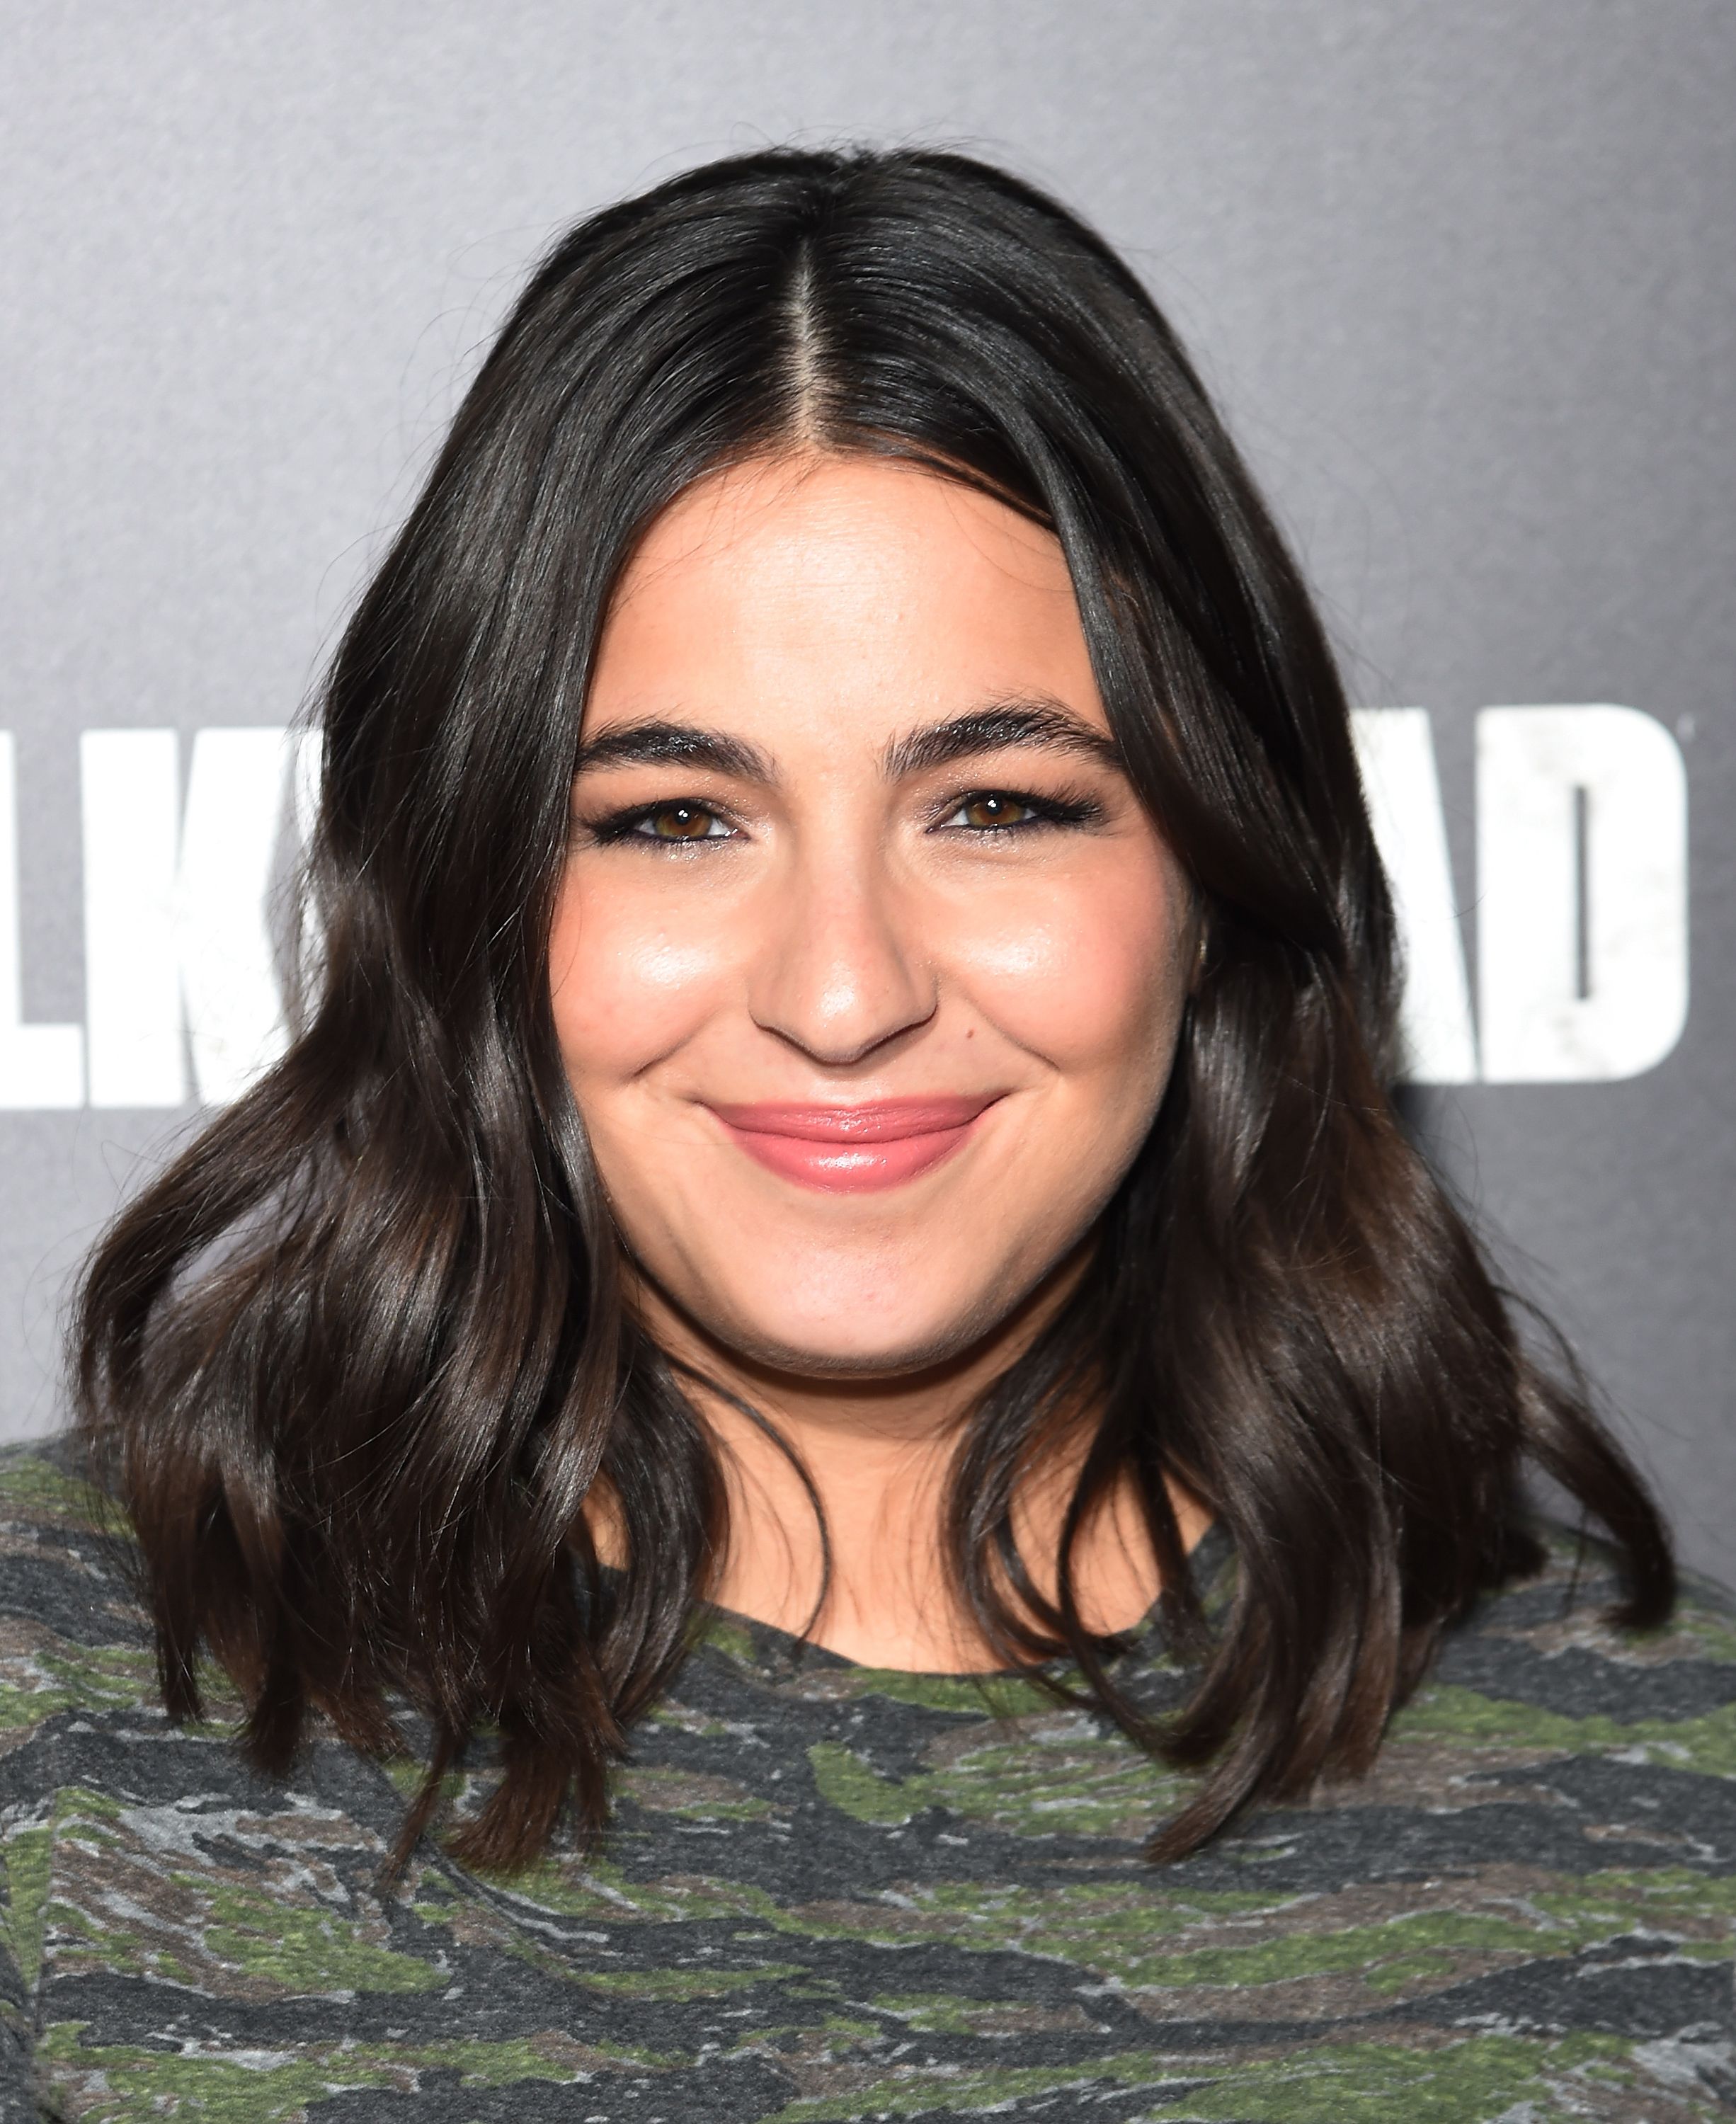 Walking Dead Cast Member Alanna Masterson Gives Birth To Her First